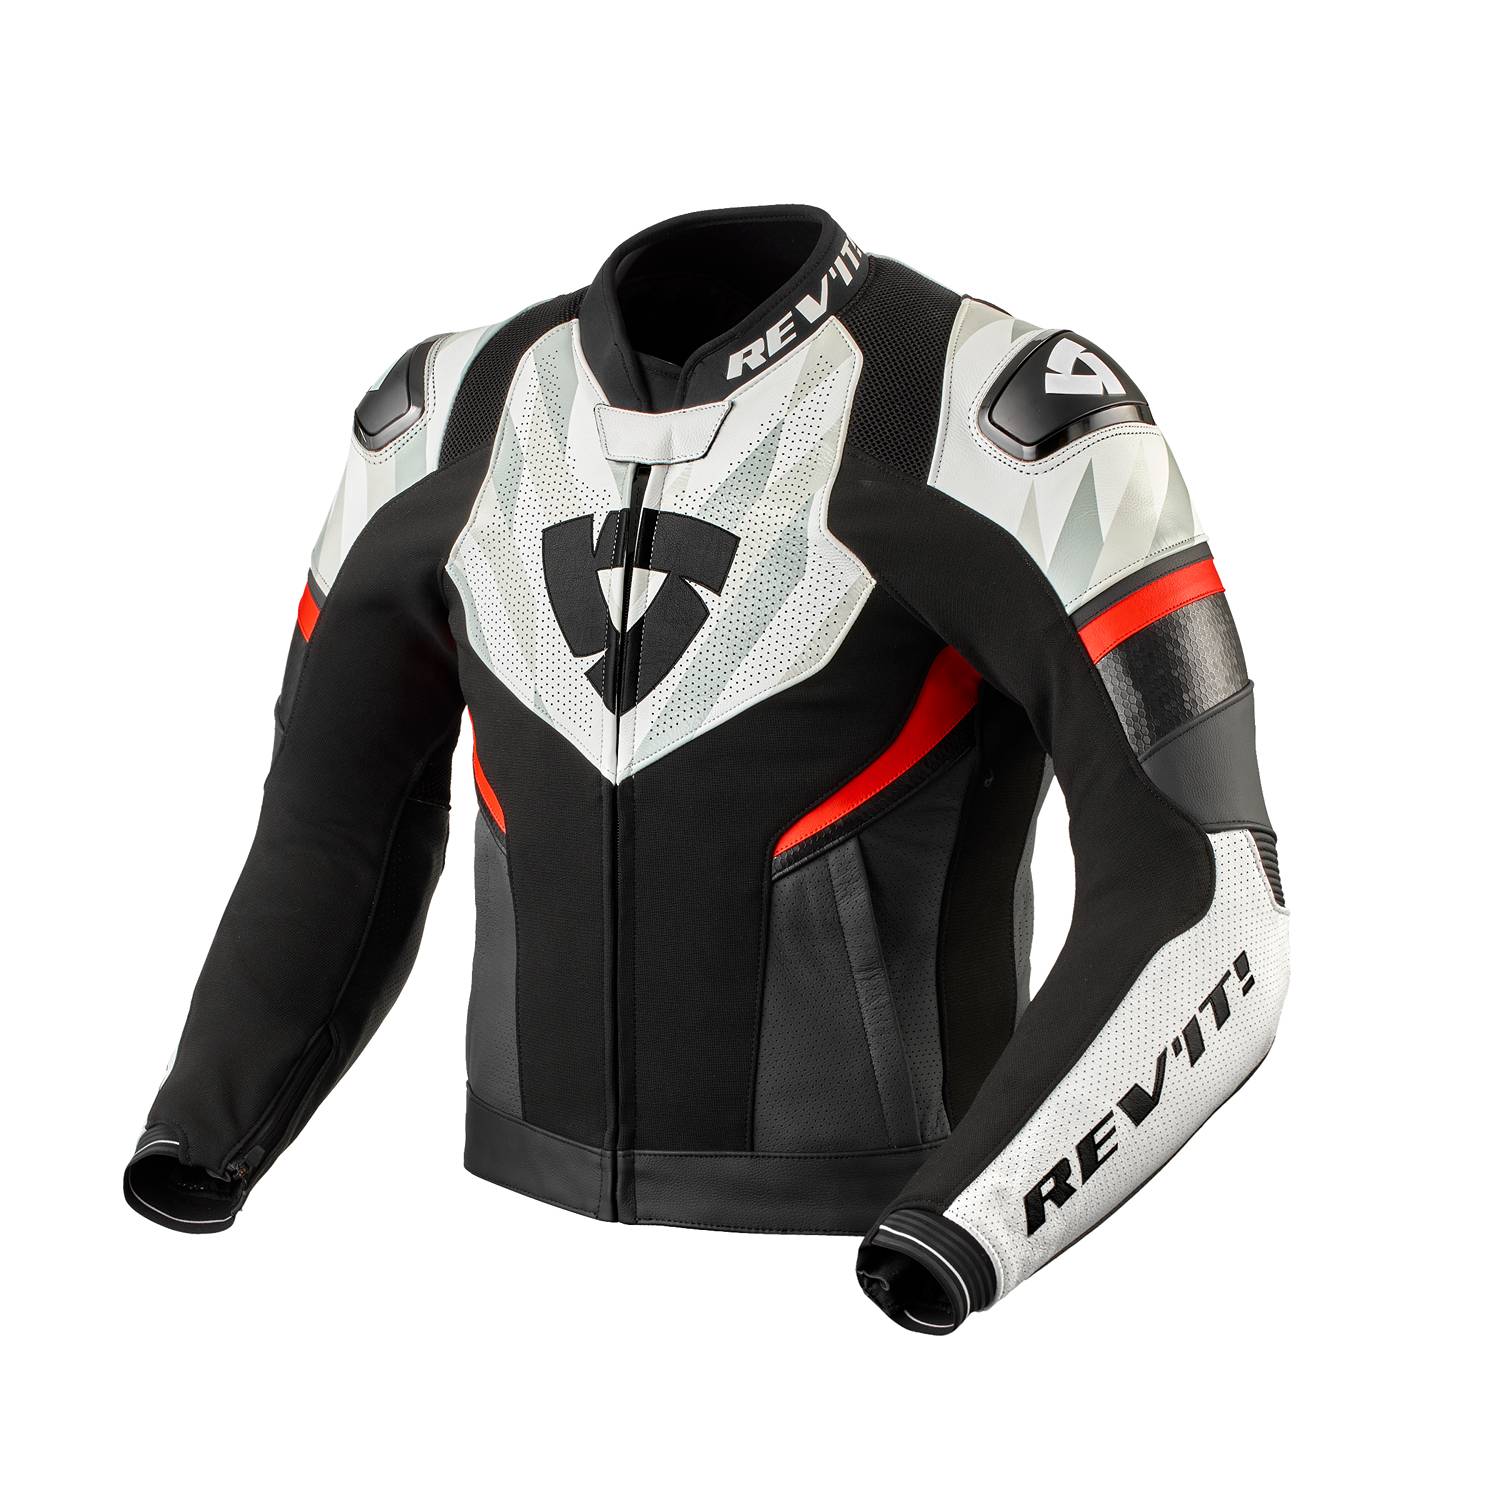 Image of REV'IT! Hyperspeed 2 Air Jacket Black White Size 52 ID 8700001358491